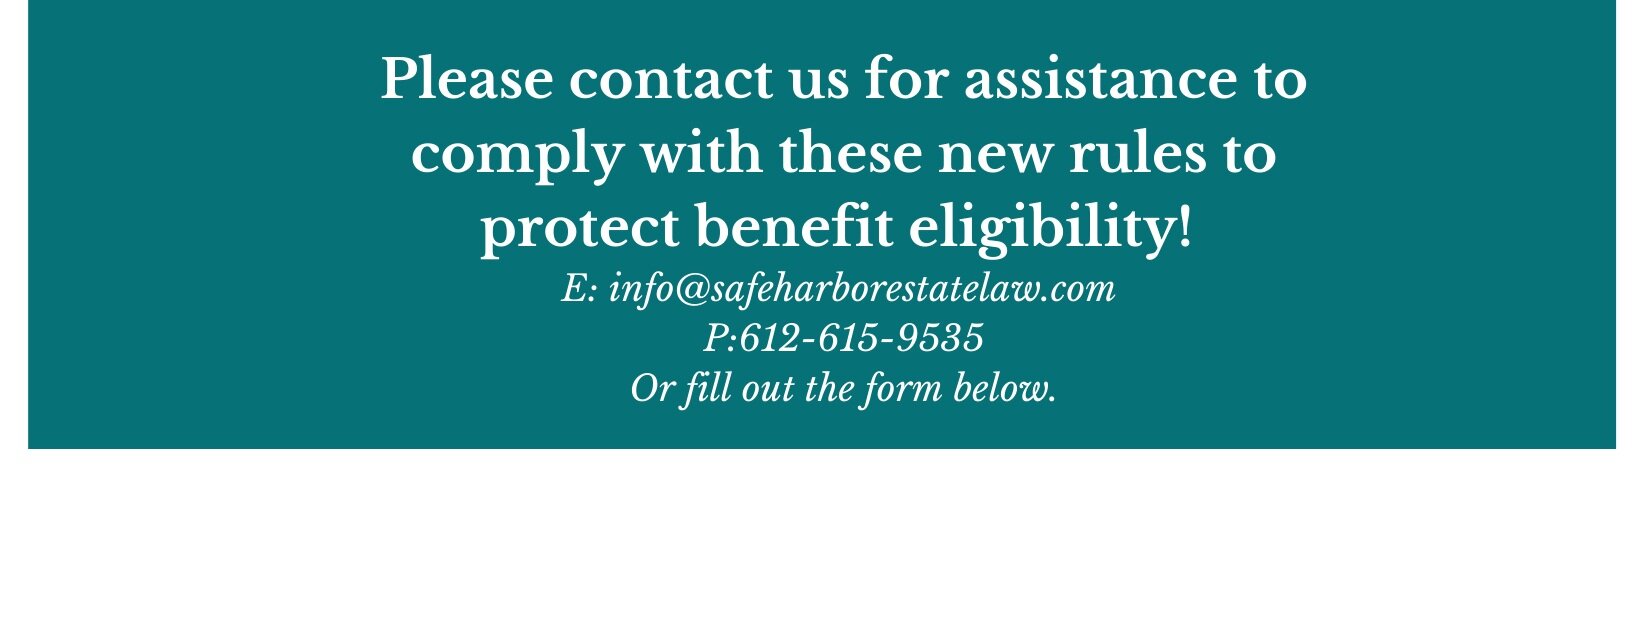 Please contact us for assistance to comply with these new rules so that you don't lose benefits. (1).png